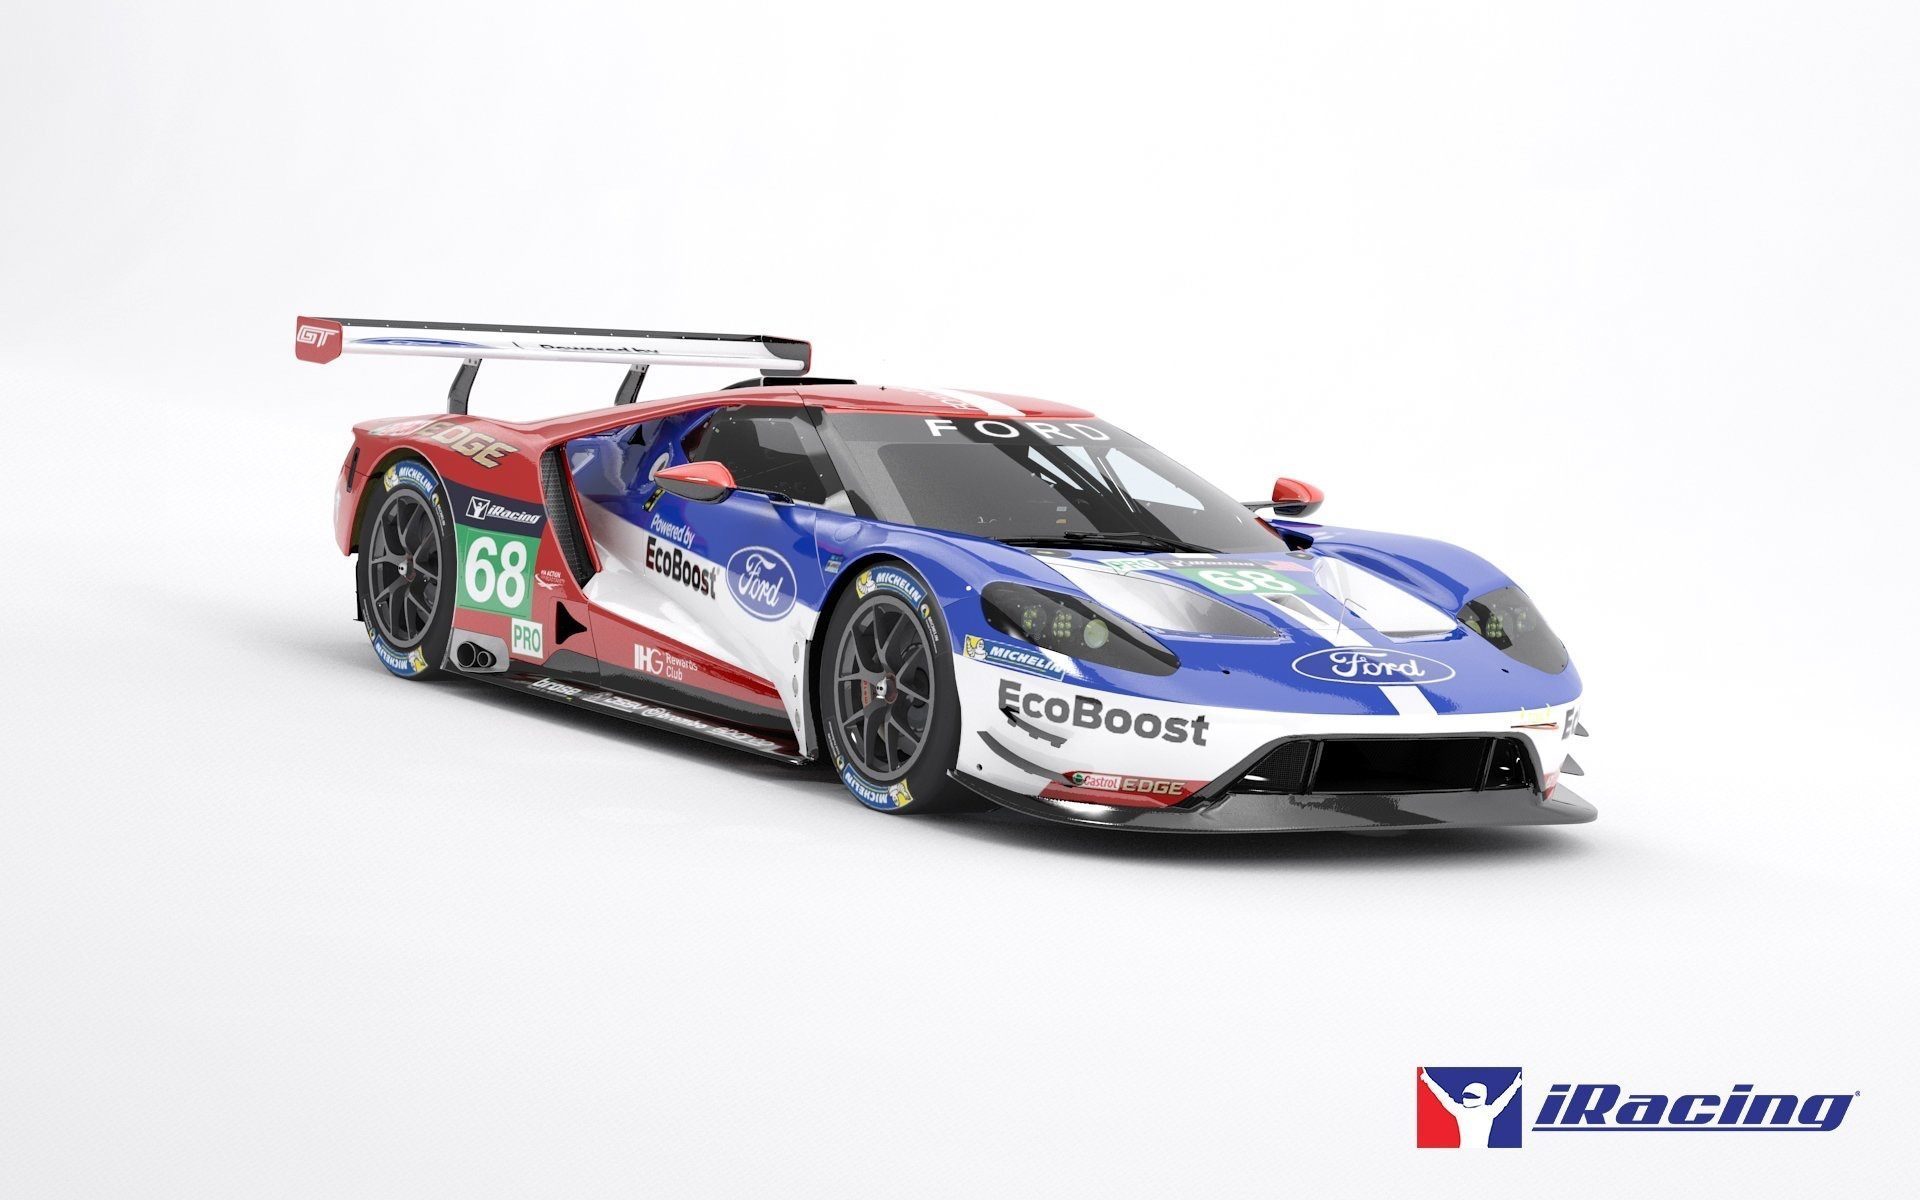 Forza Motorsport 6 Announced with New Ford GT as Cover Car – GTPlanet